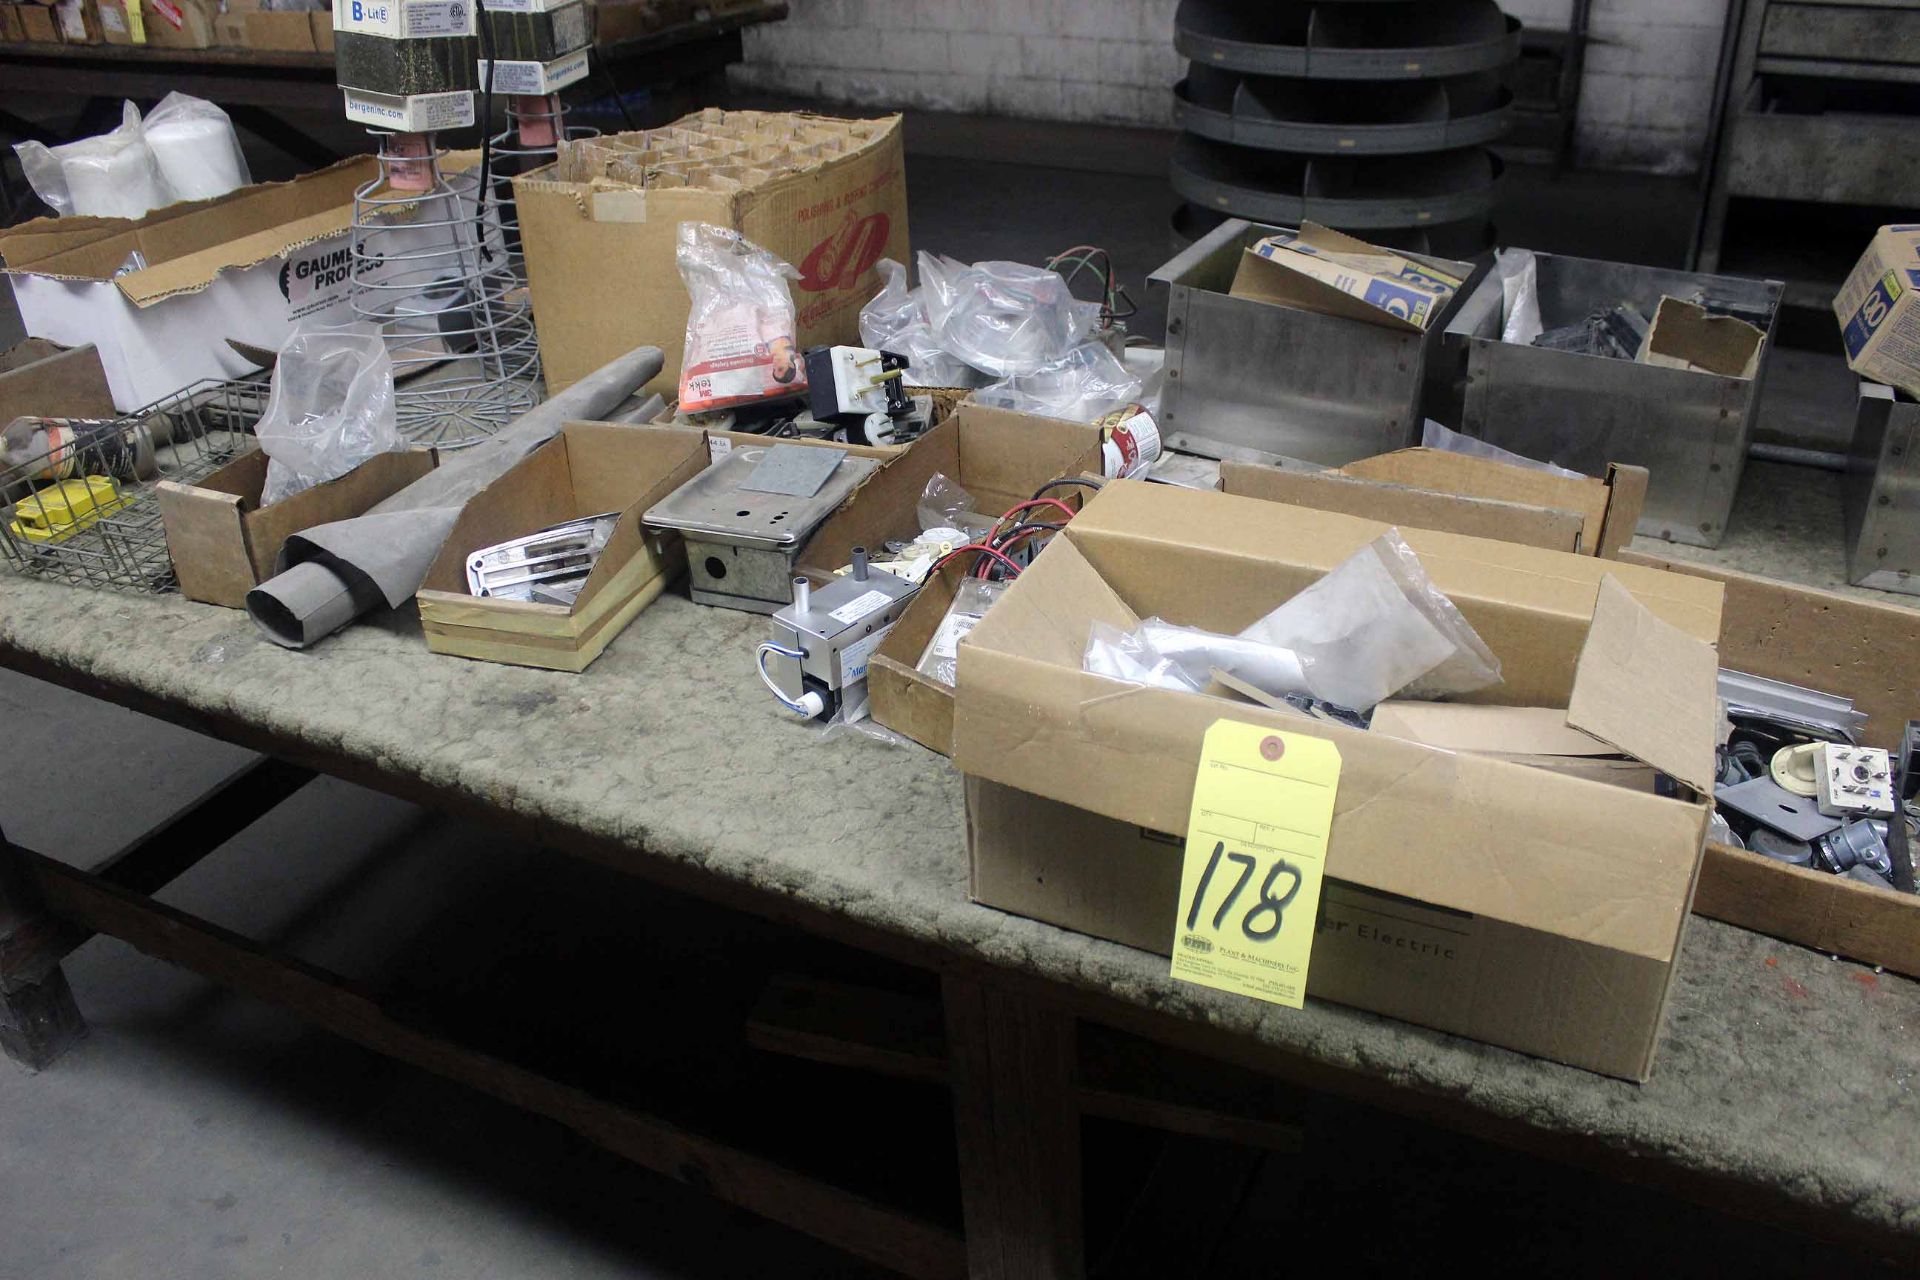 LOT OF MISC. KITCHEN SUPPLIES: electrical, nails, etc.